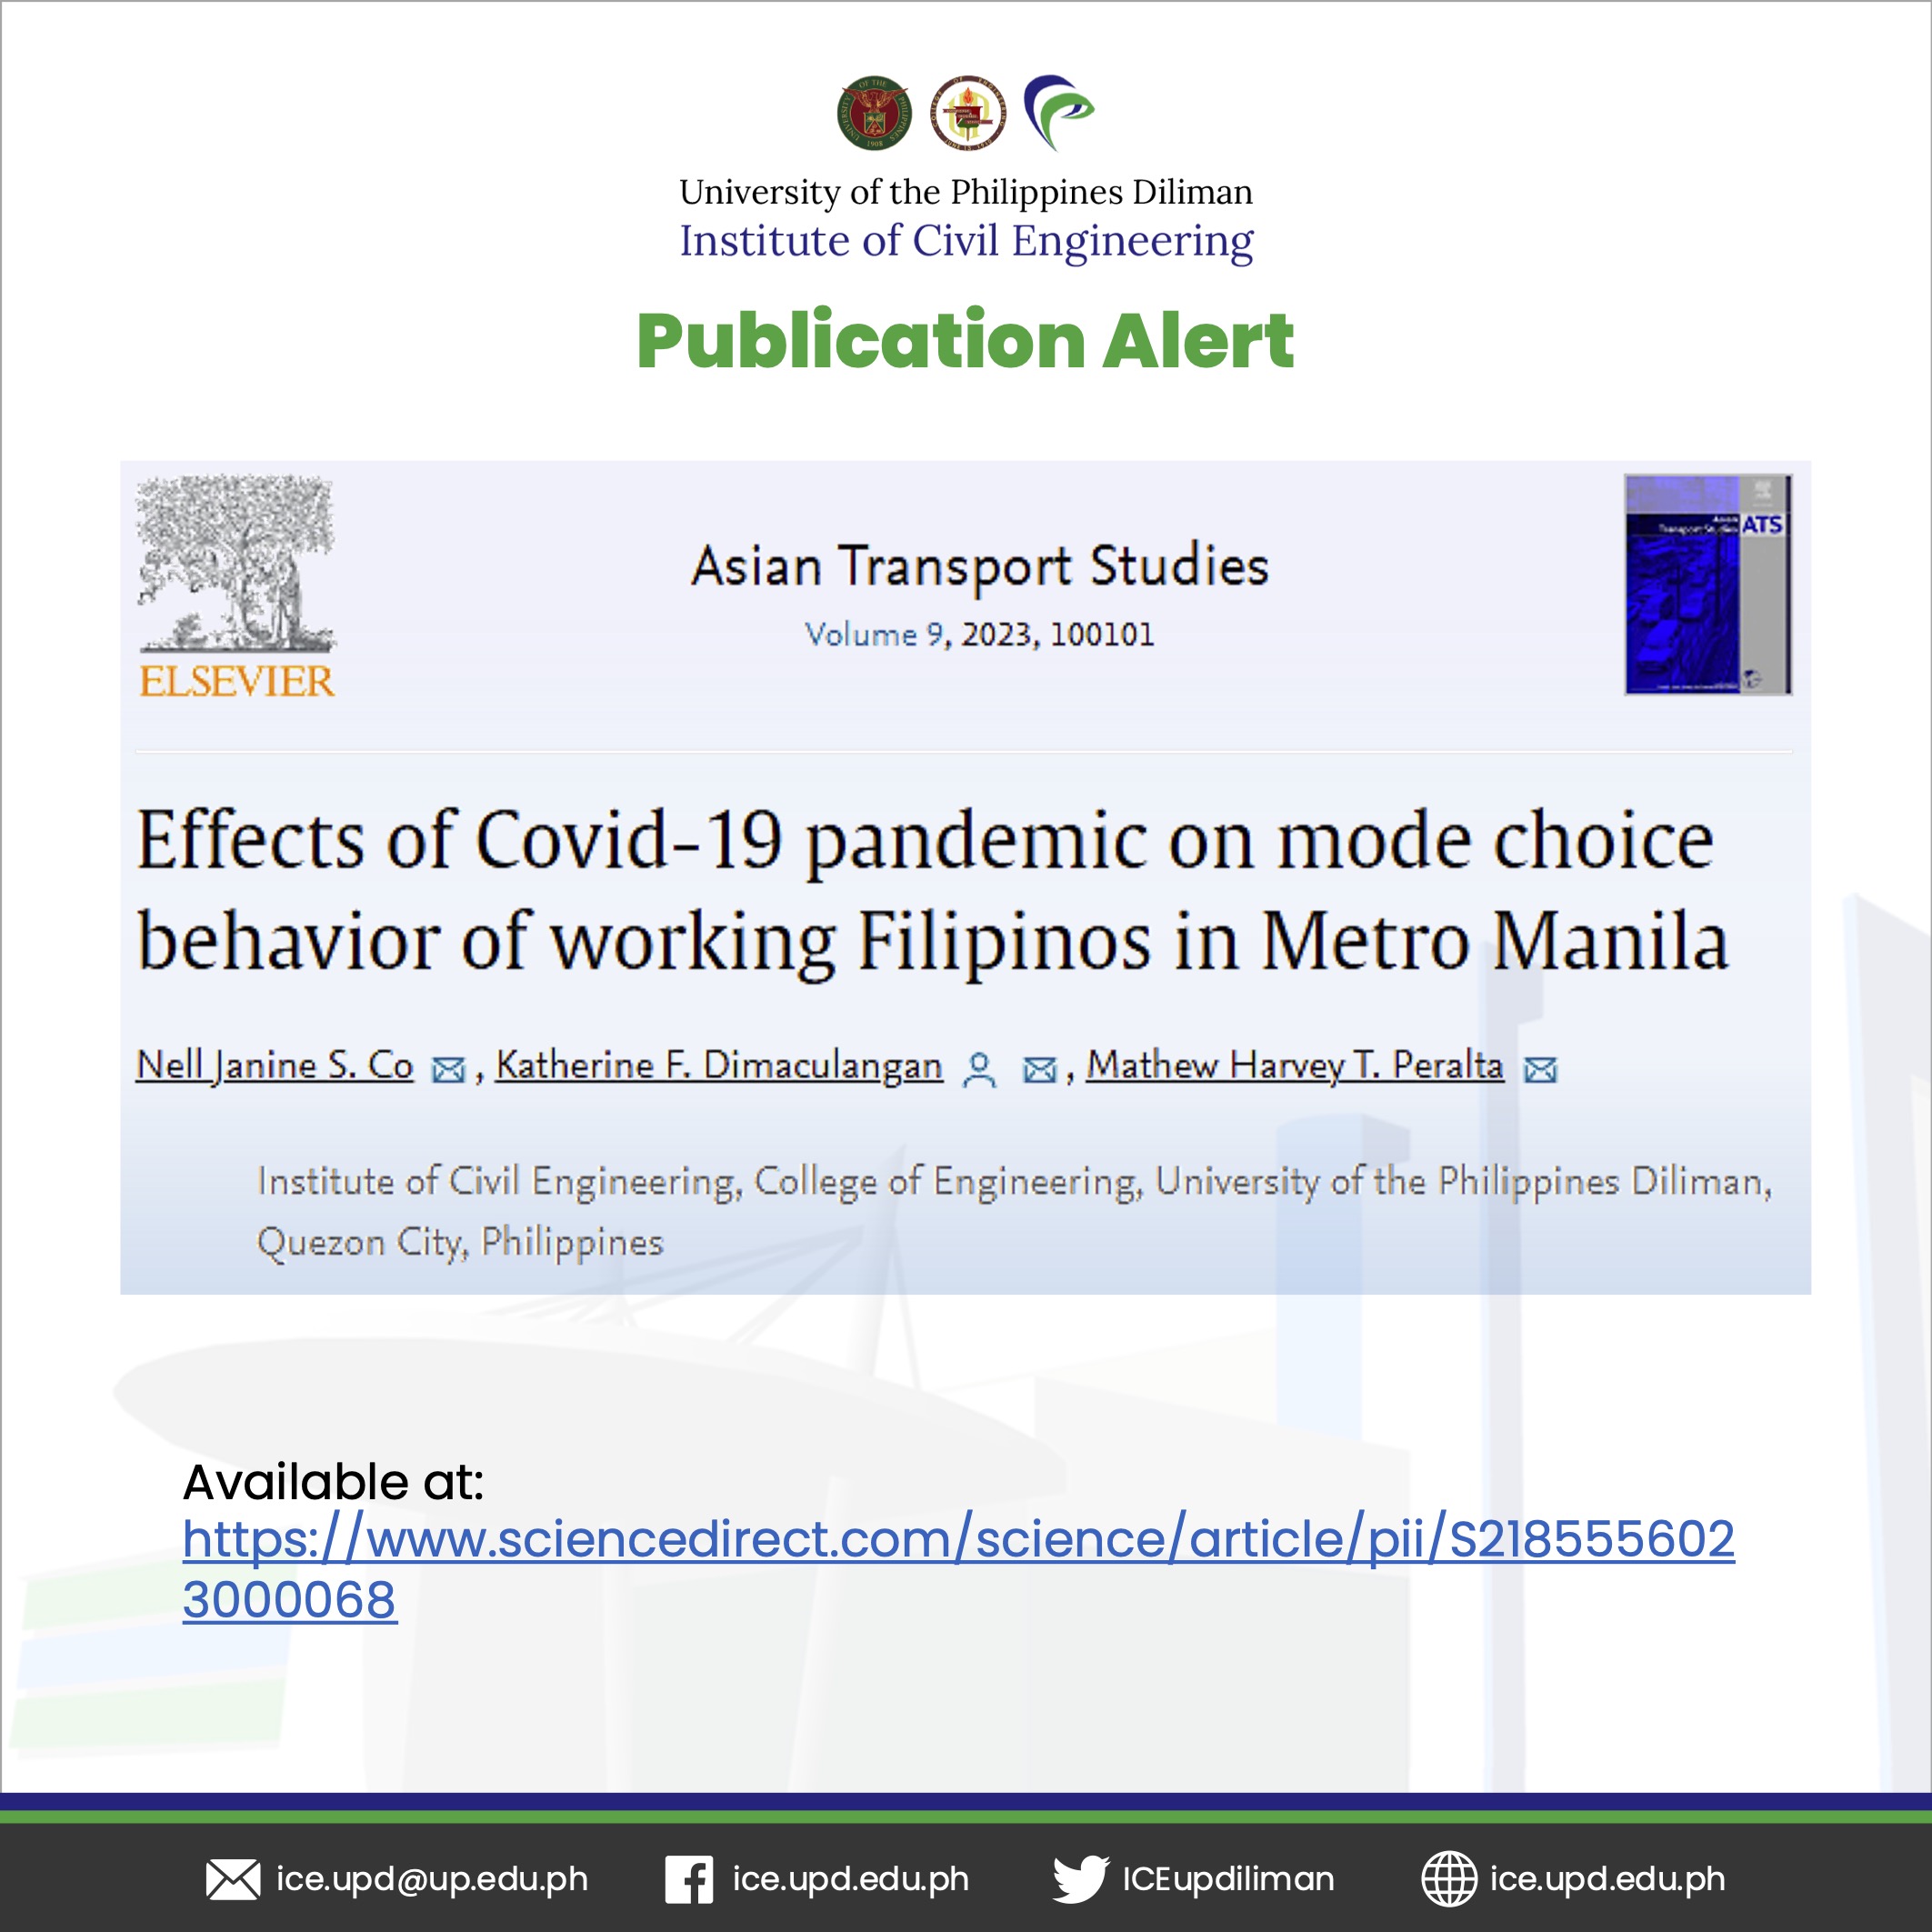 Publication Alert: Effects of Covid-19 pandemic on mode choice behavior of working Filipinos in Metro Manila